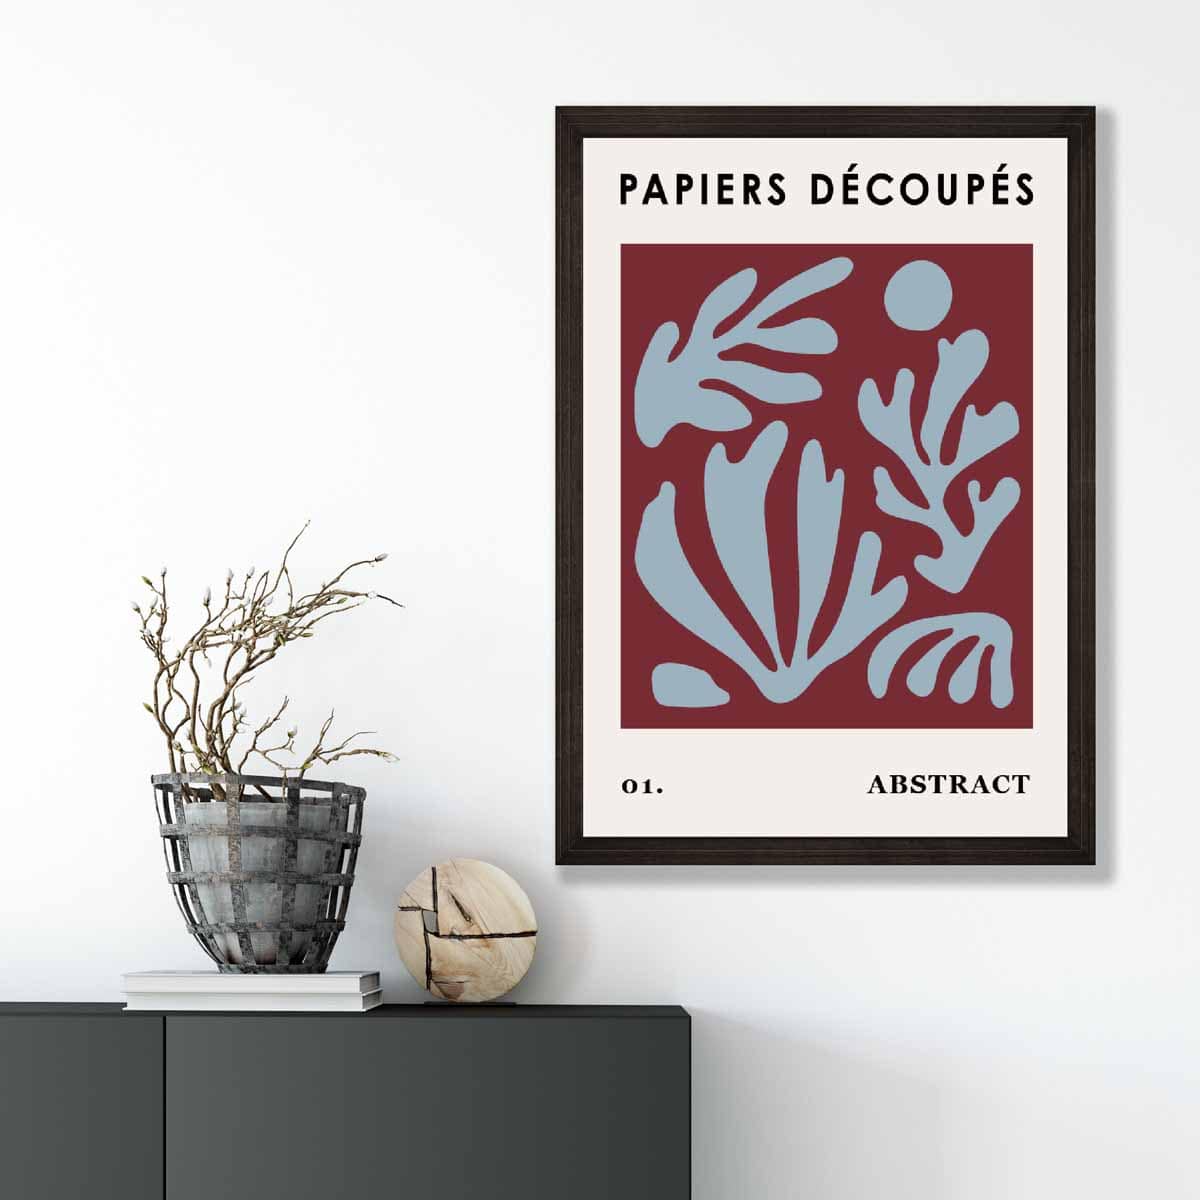 Papiers Decoupes Abstract Poster No 1 in Red and Blue